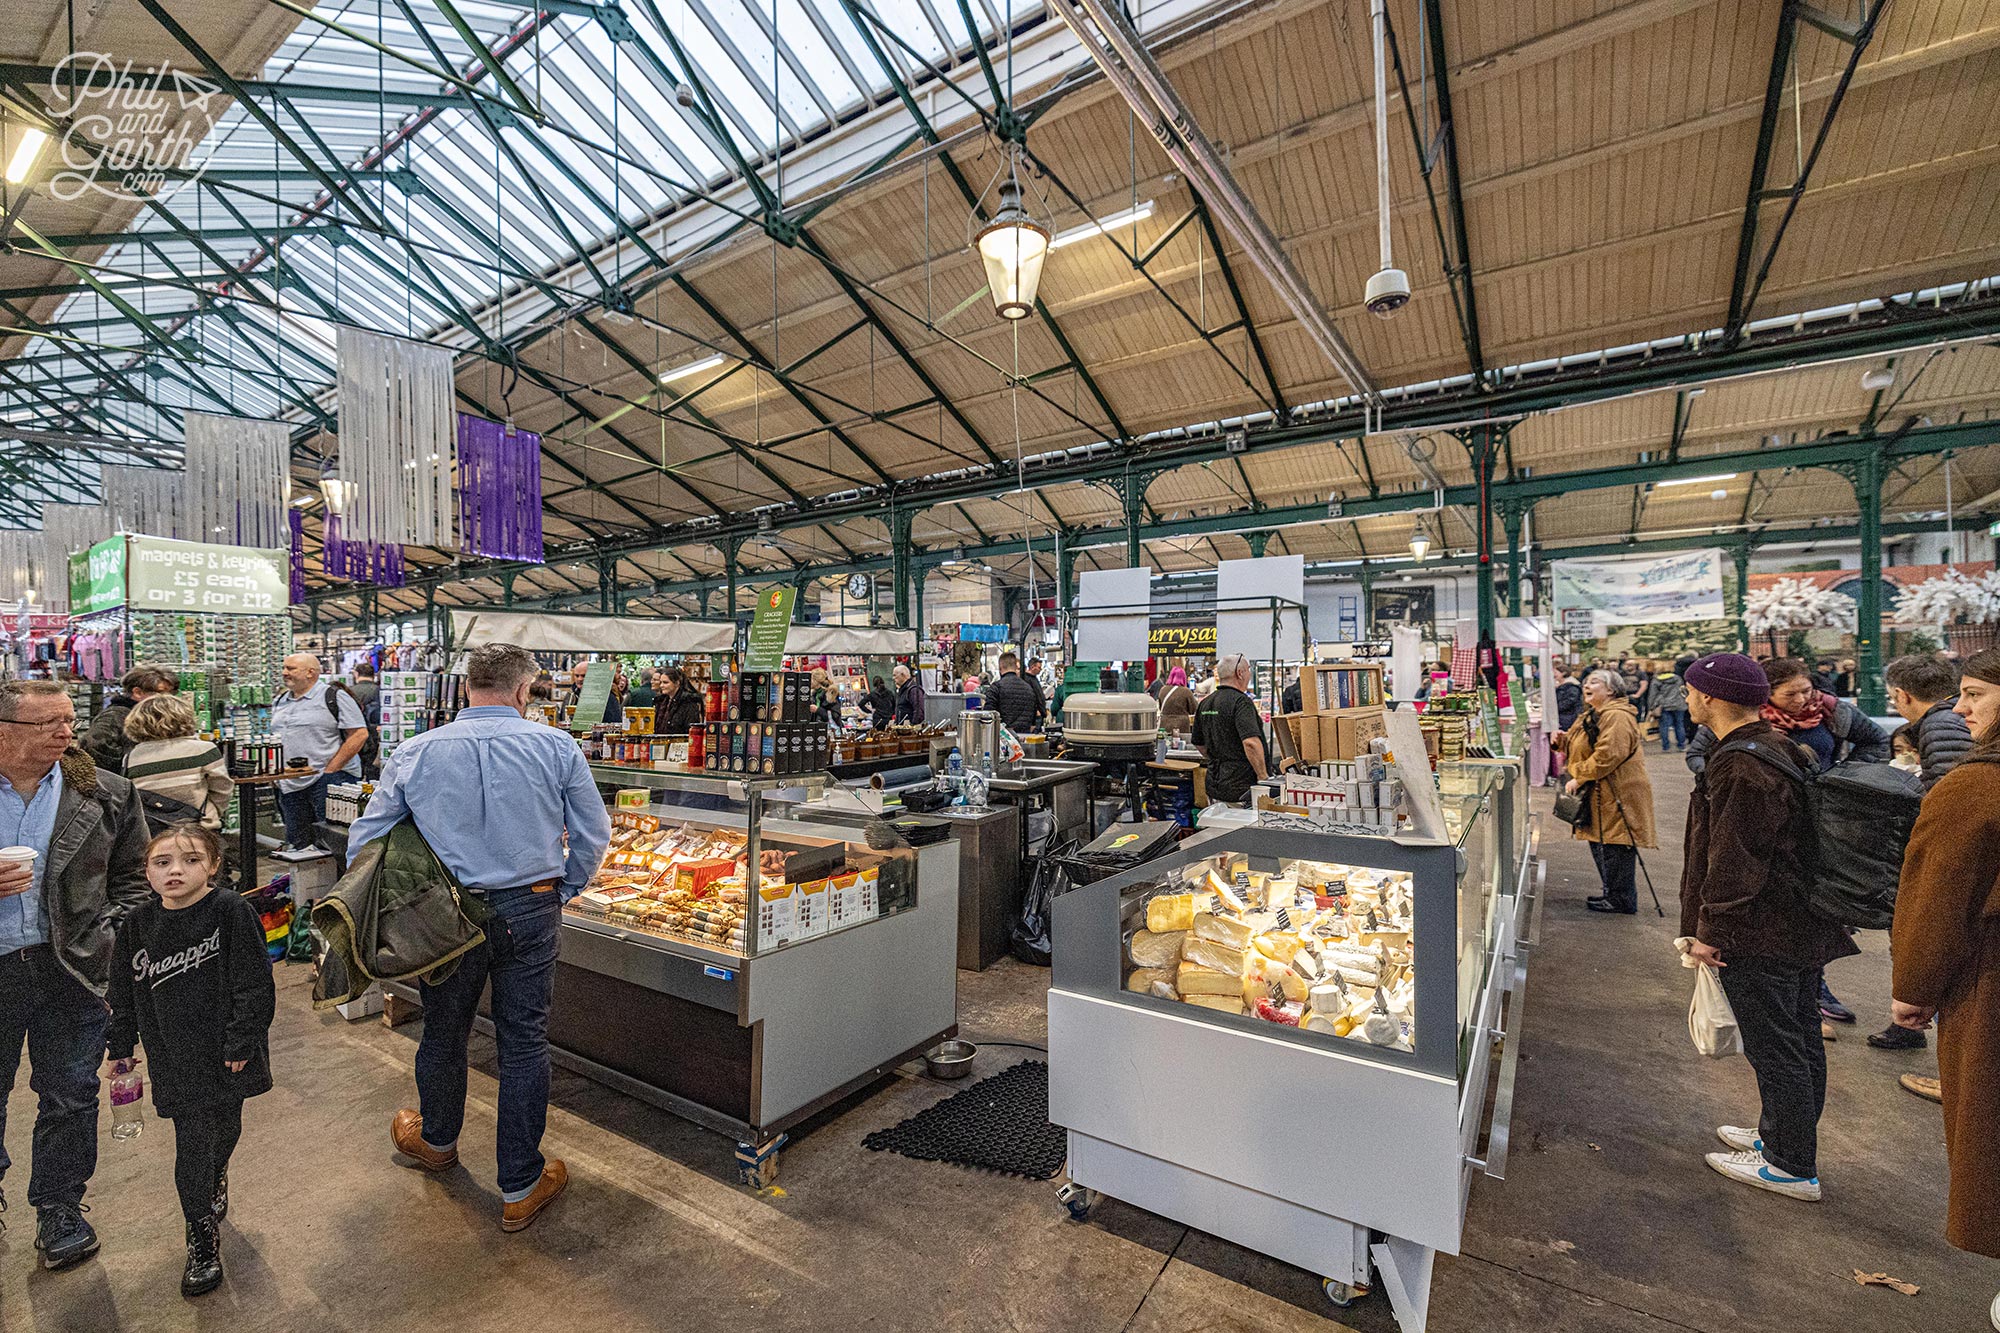 St George's Market - huge variety of stalls selling crafts, food and antiques all in one place